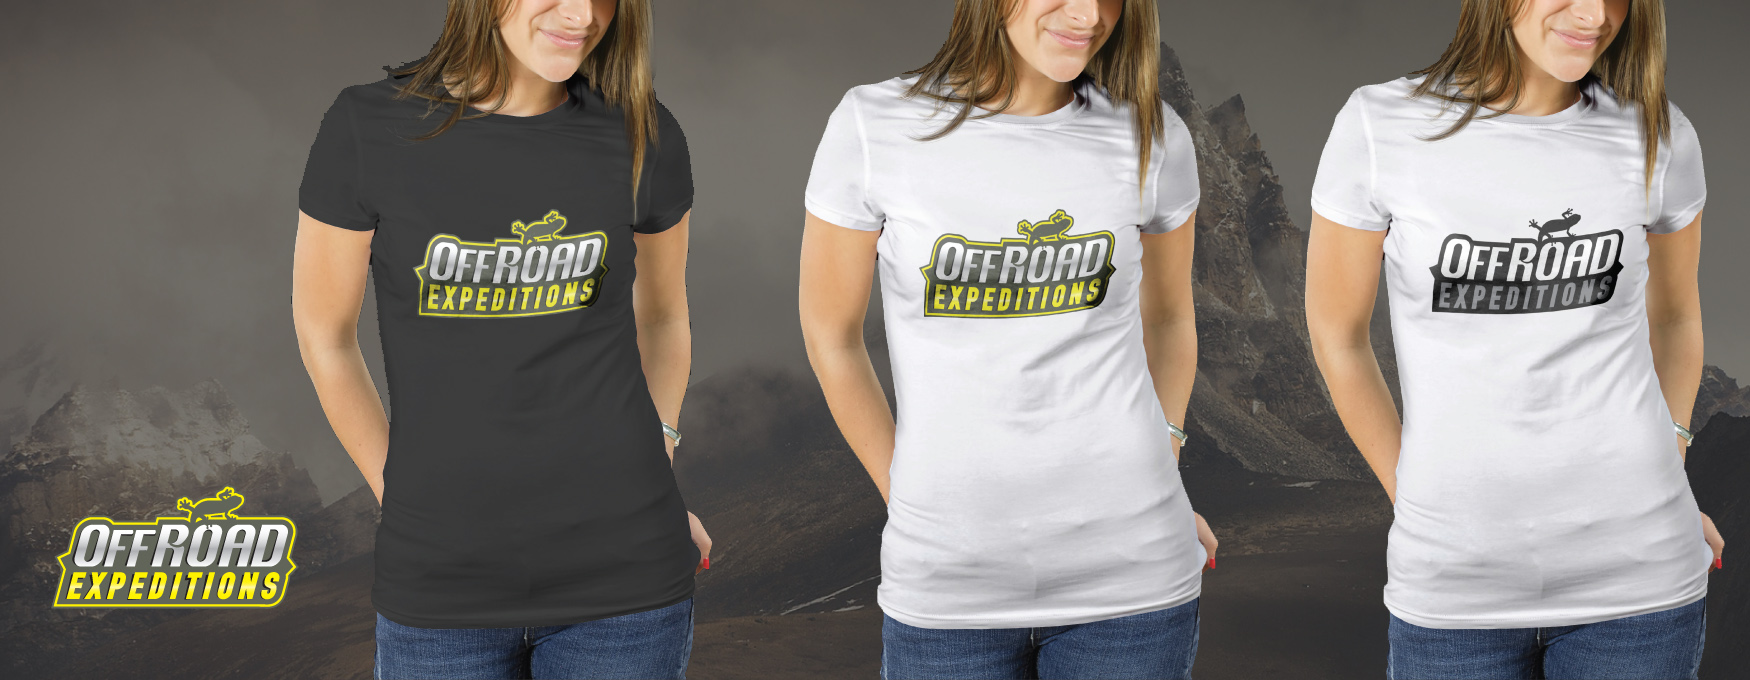 offroad-expeditions-t-shirt